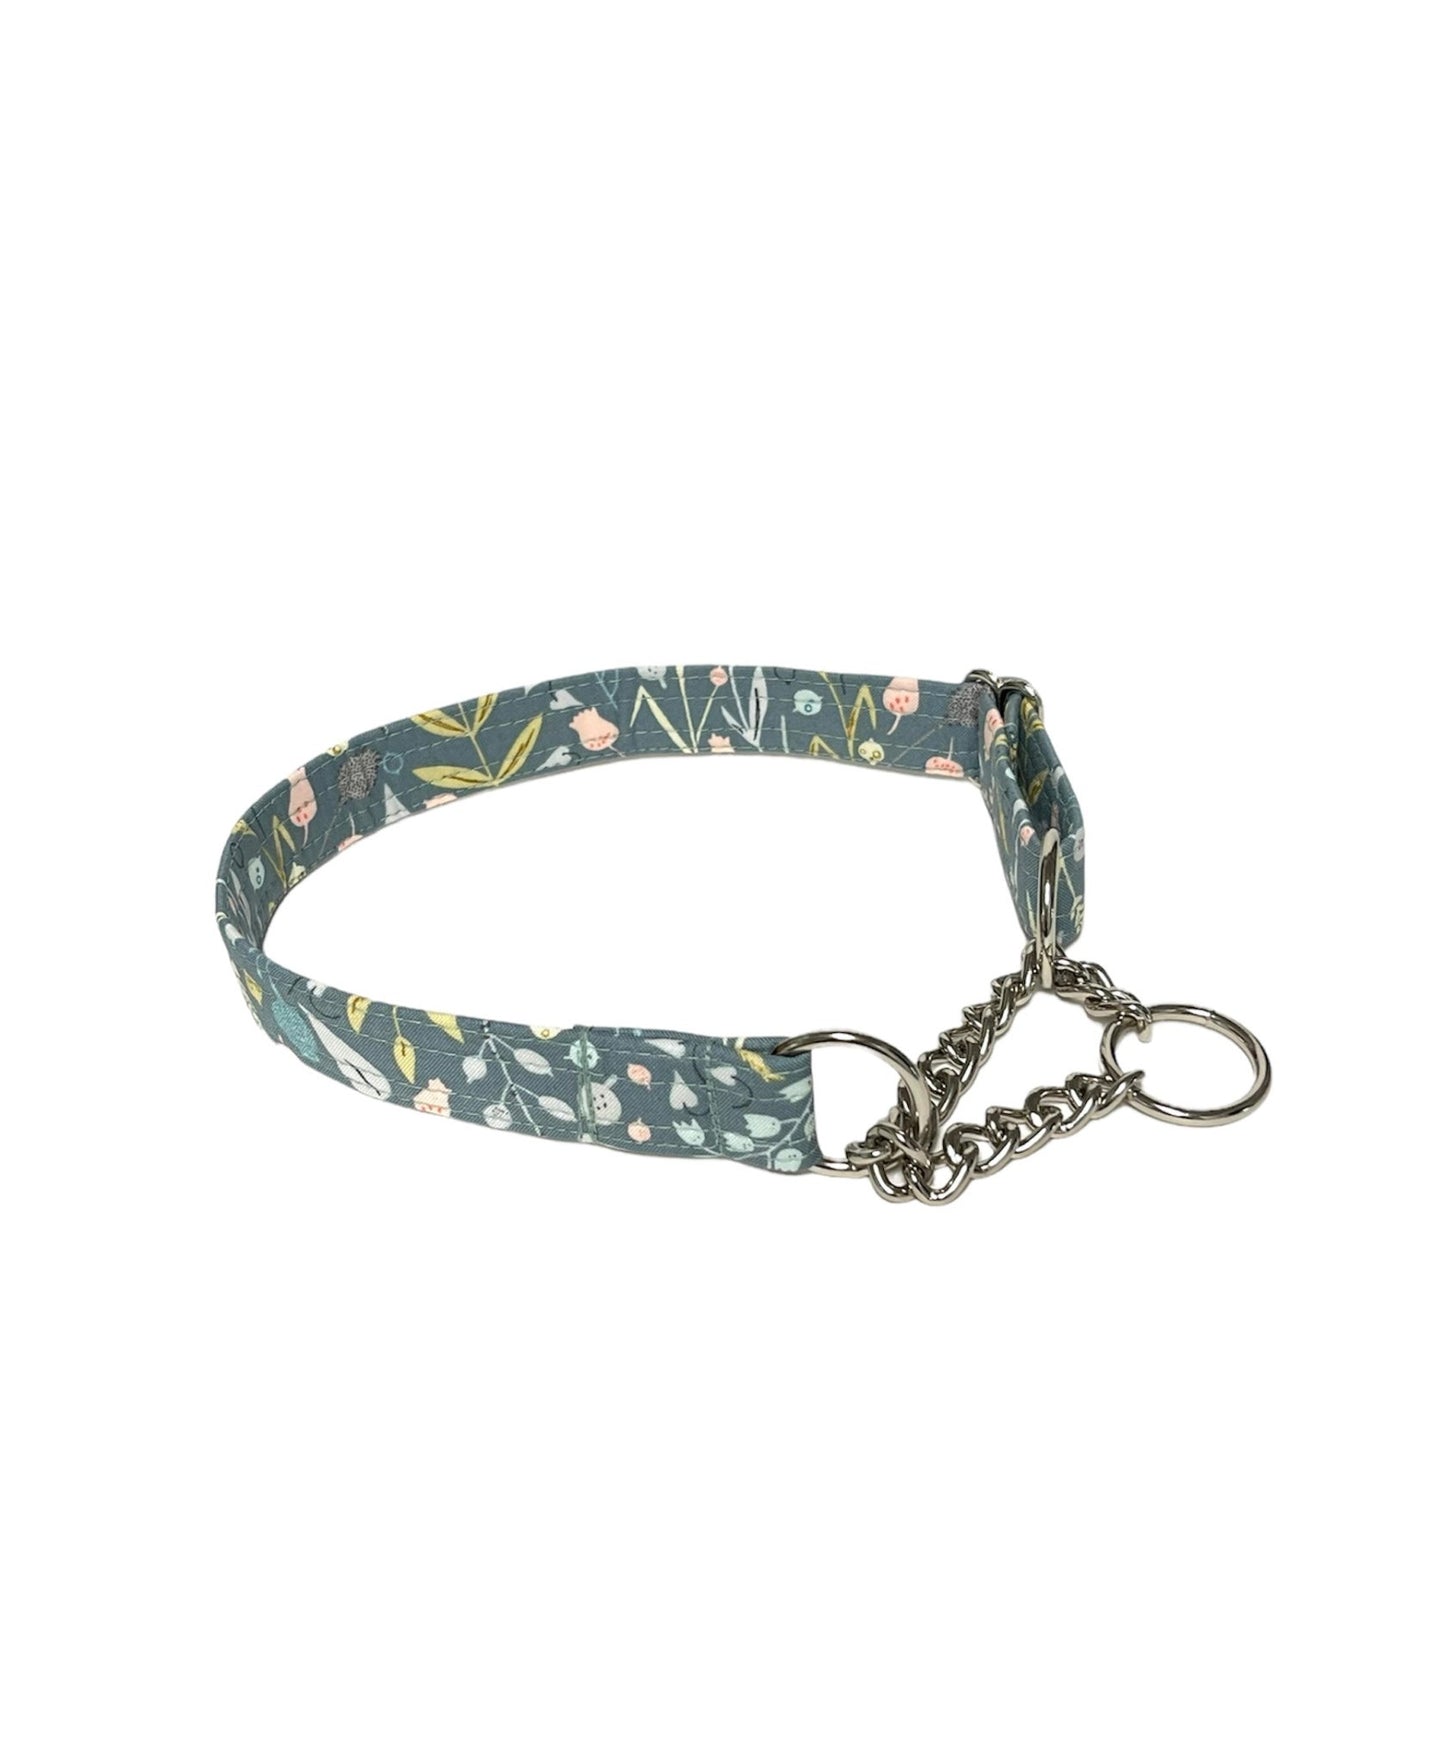  blue floral chain martingale dog collar